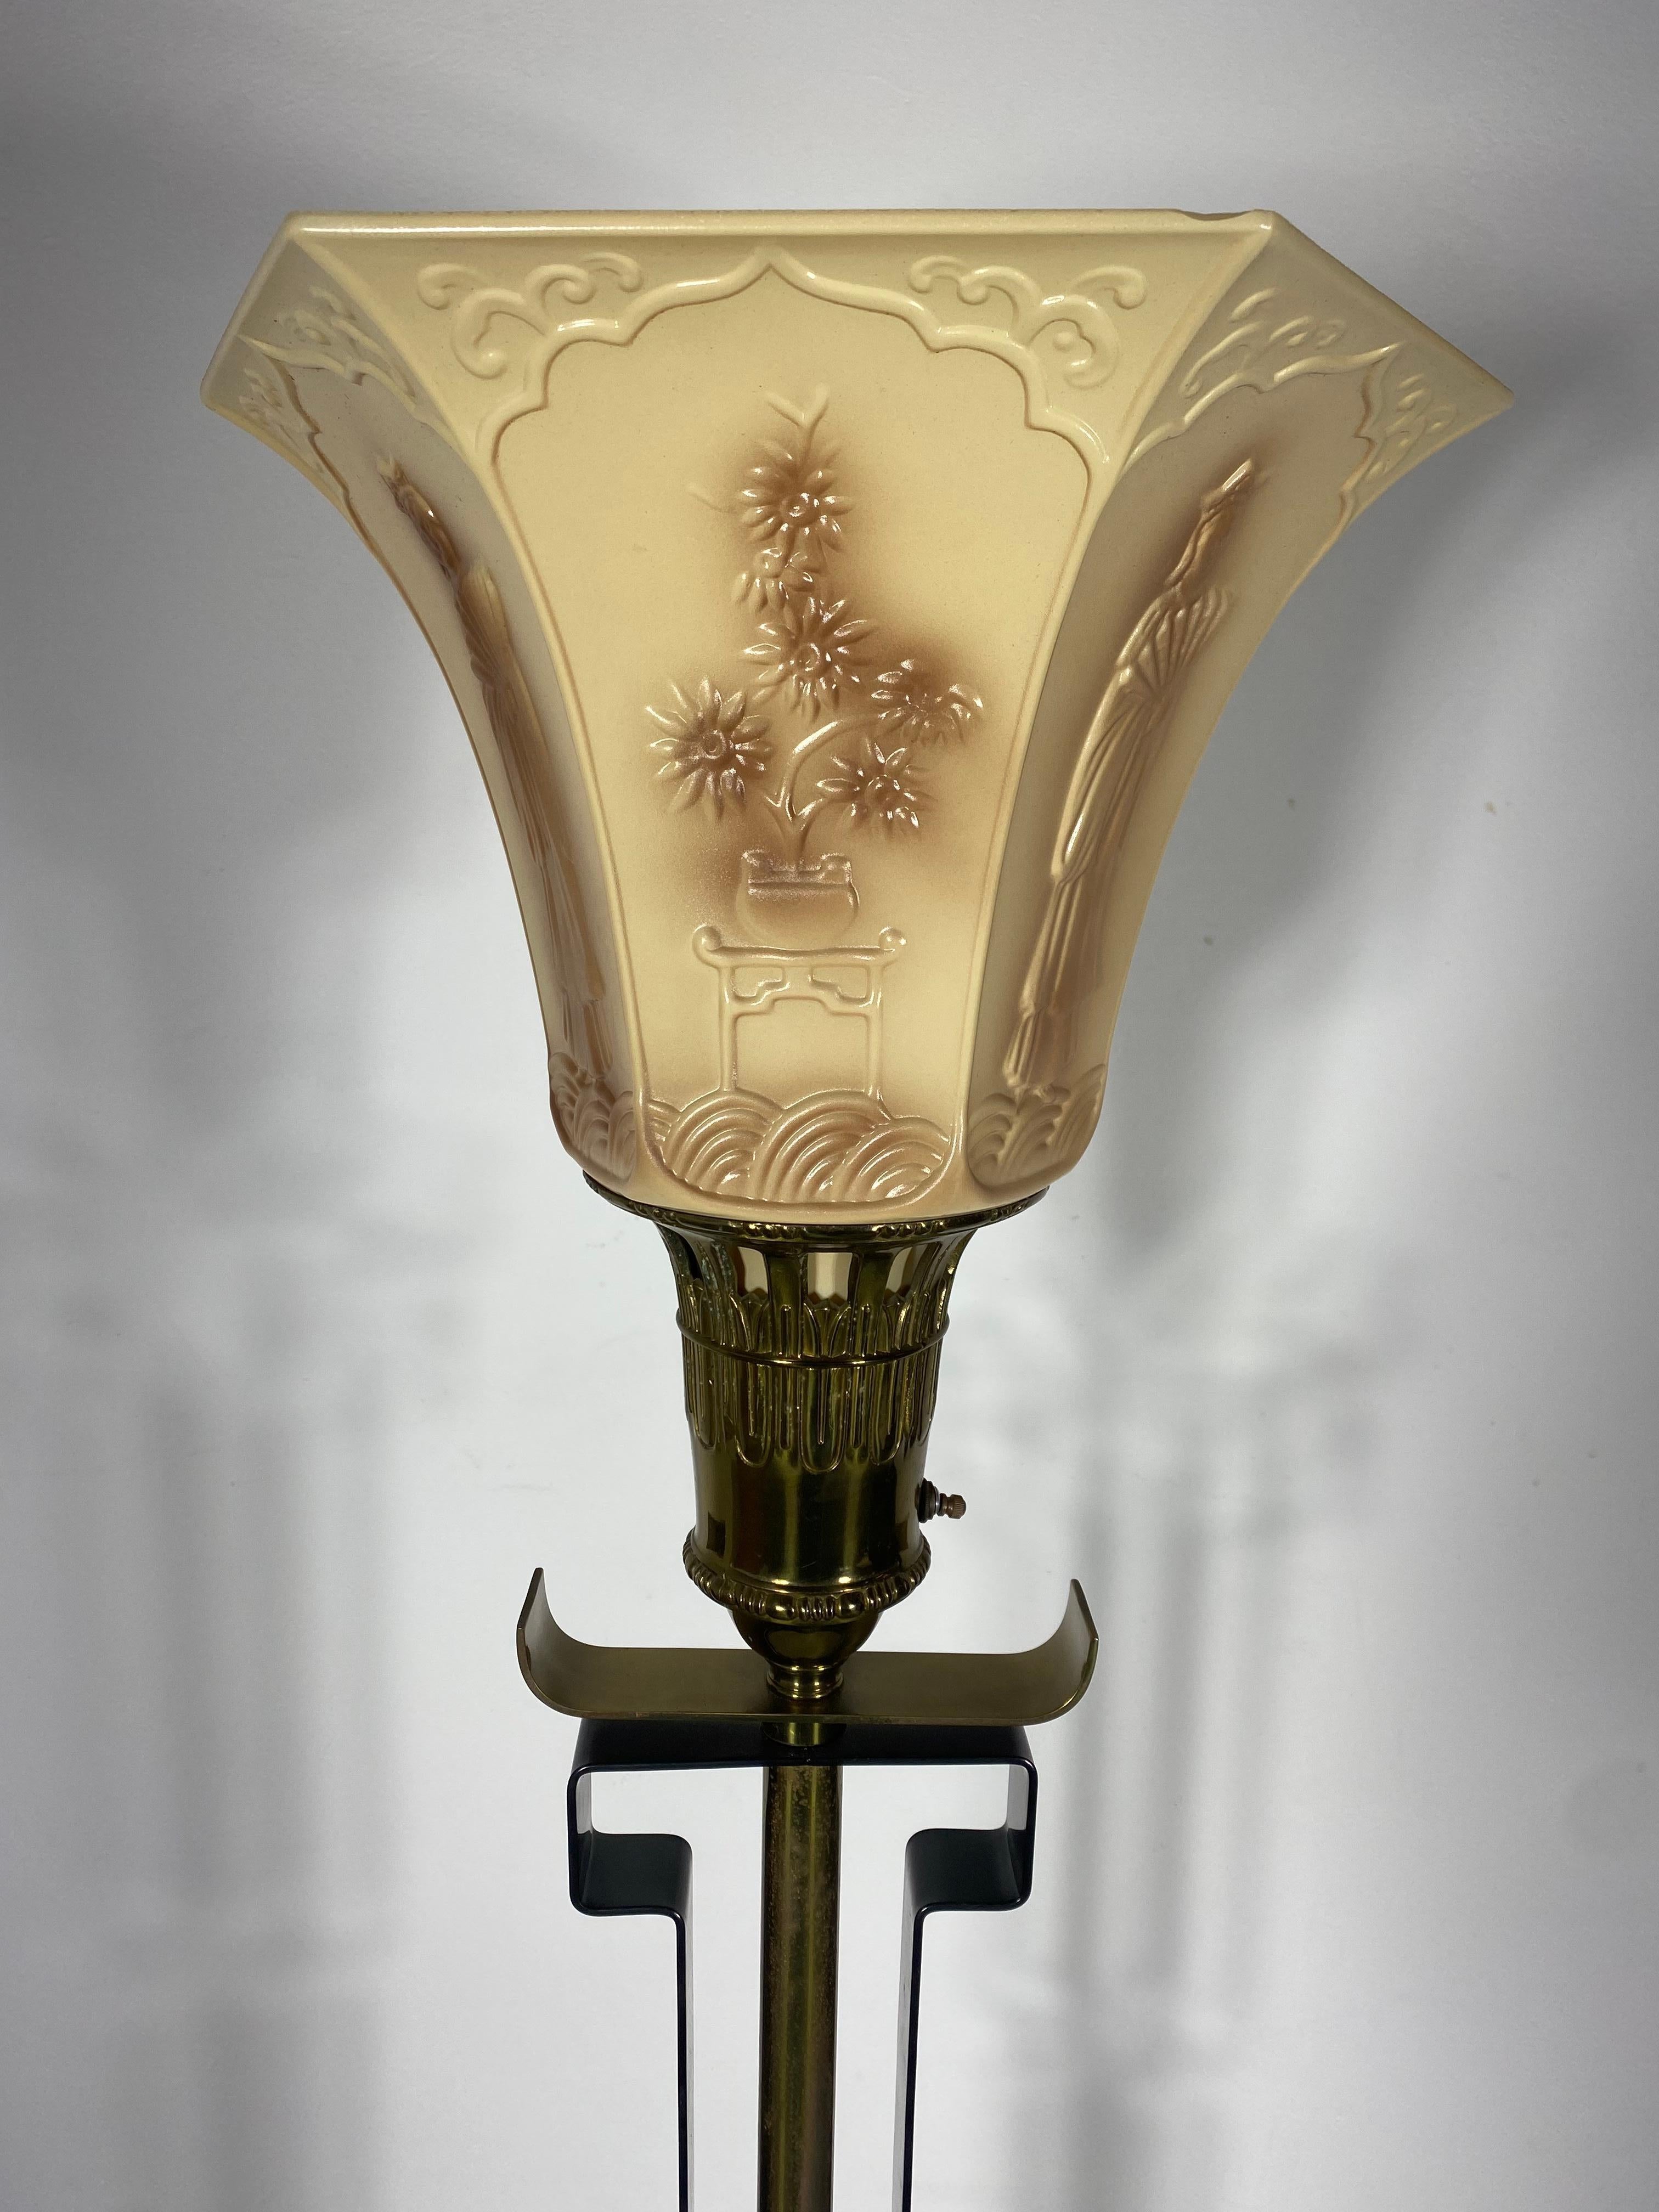 Stunning Asian Modernist Torchere / floor lamp. Attributed to James Mont 1940s, Classic form, Black lacquered metal standard ,brass ornamentation, detailing. Amazing embossed glass shade boasting oriental woman and floral design. 3-way switch light